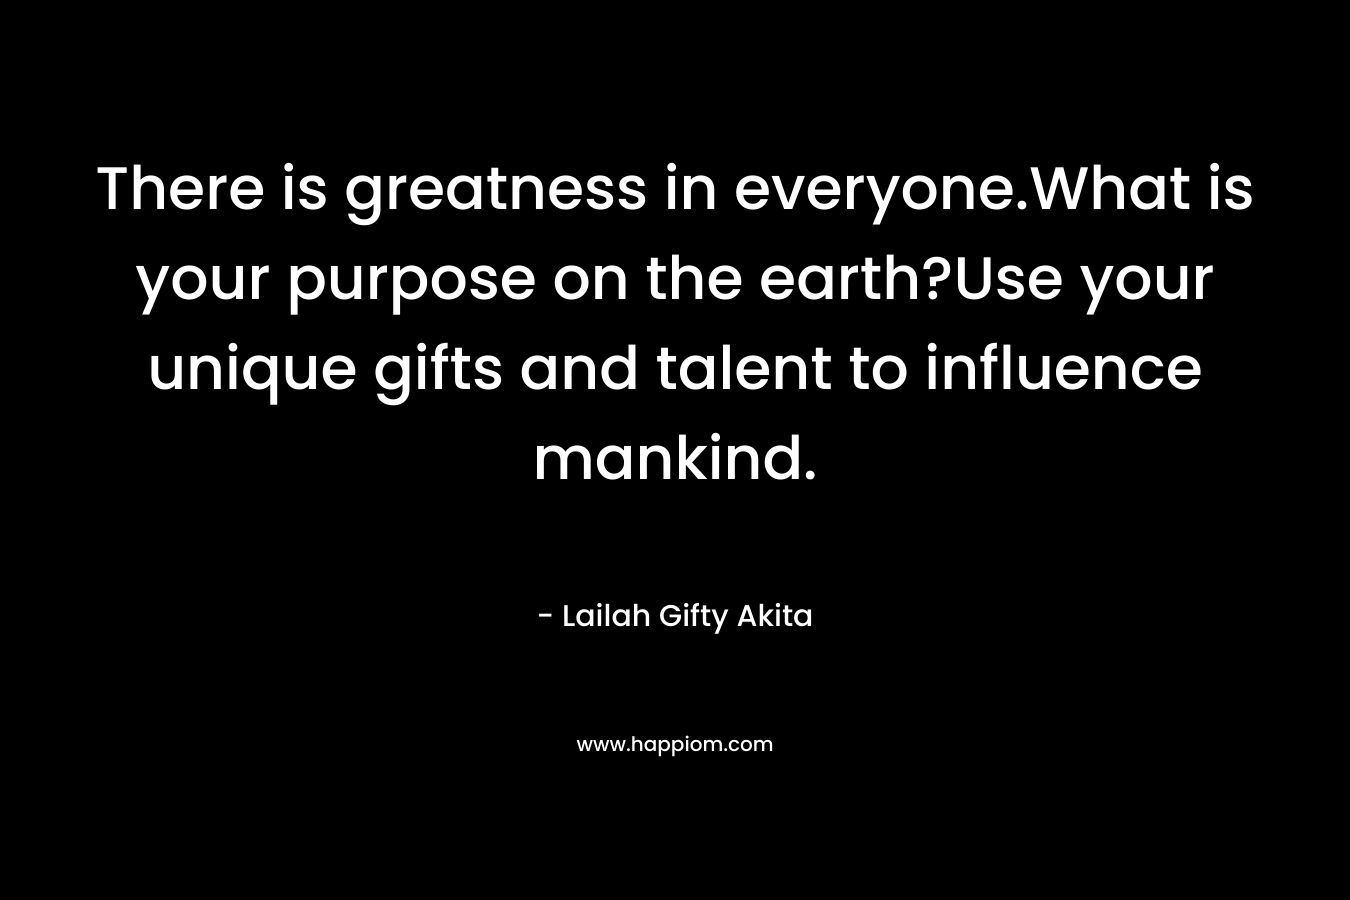 There is greatness in everyone.What is your purpose on the earth?Use your unique gifts and talent to influence mankind.